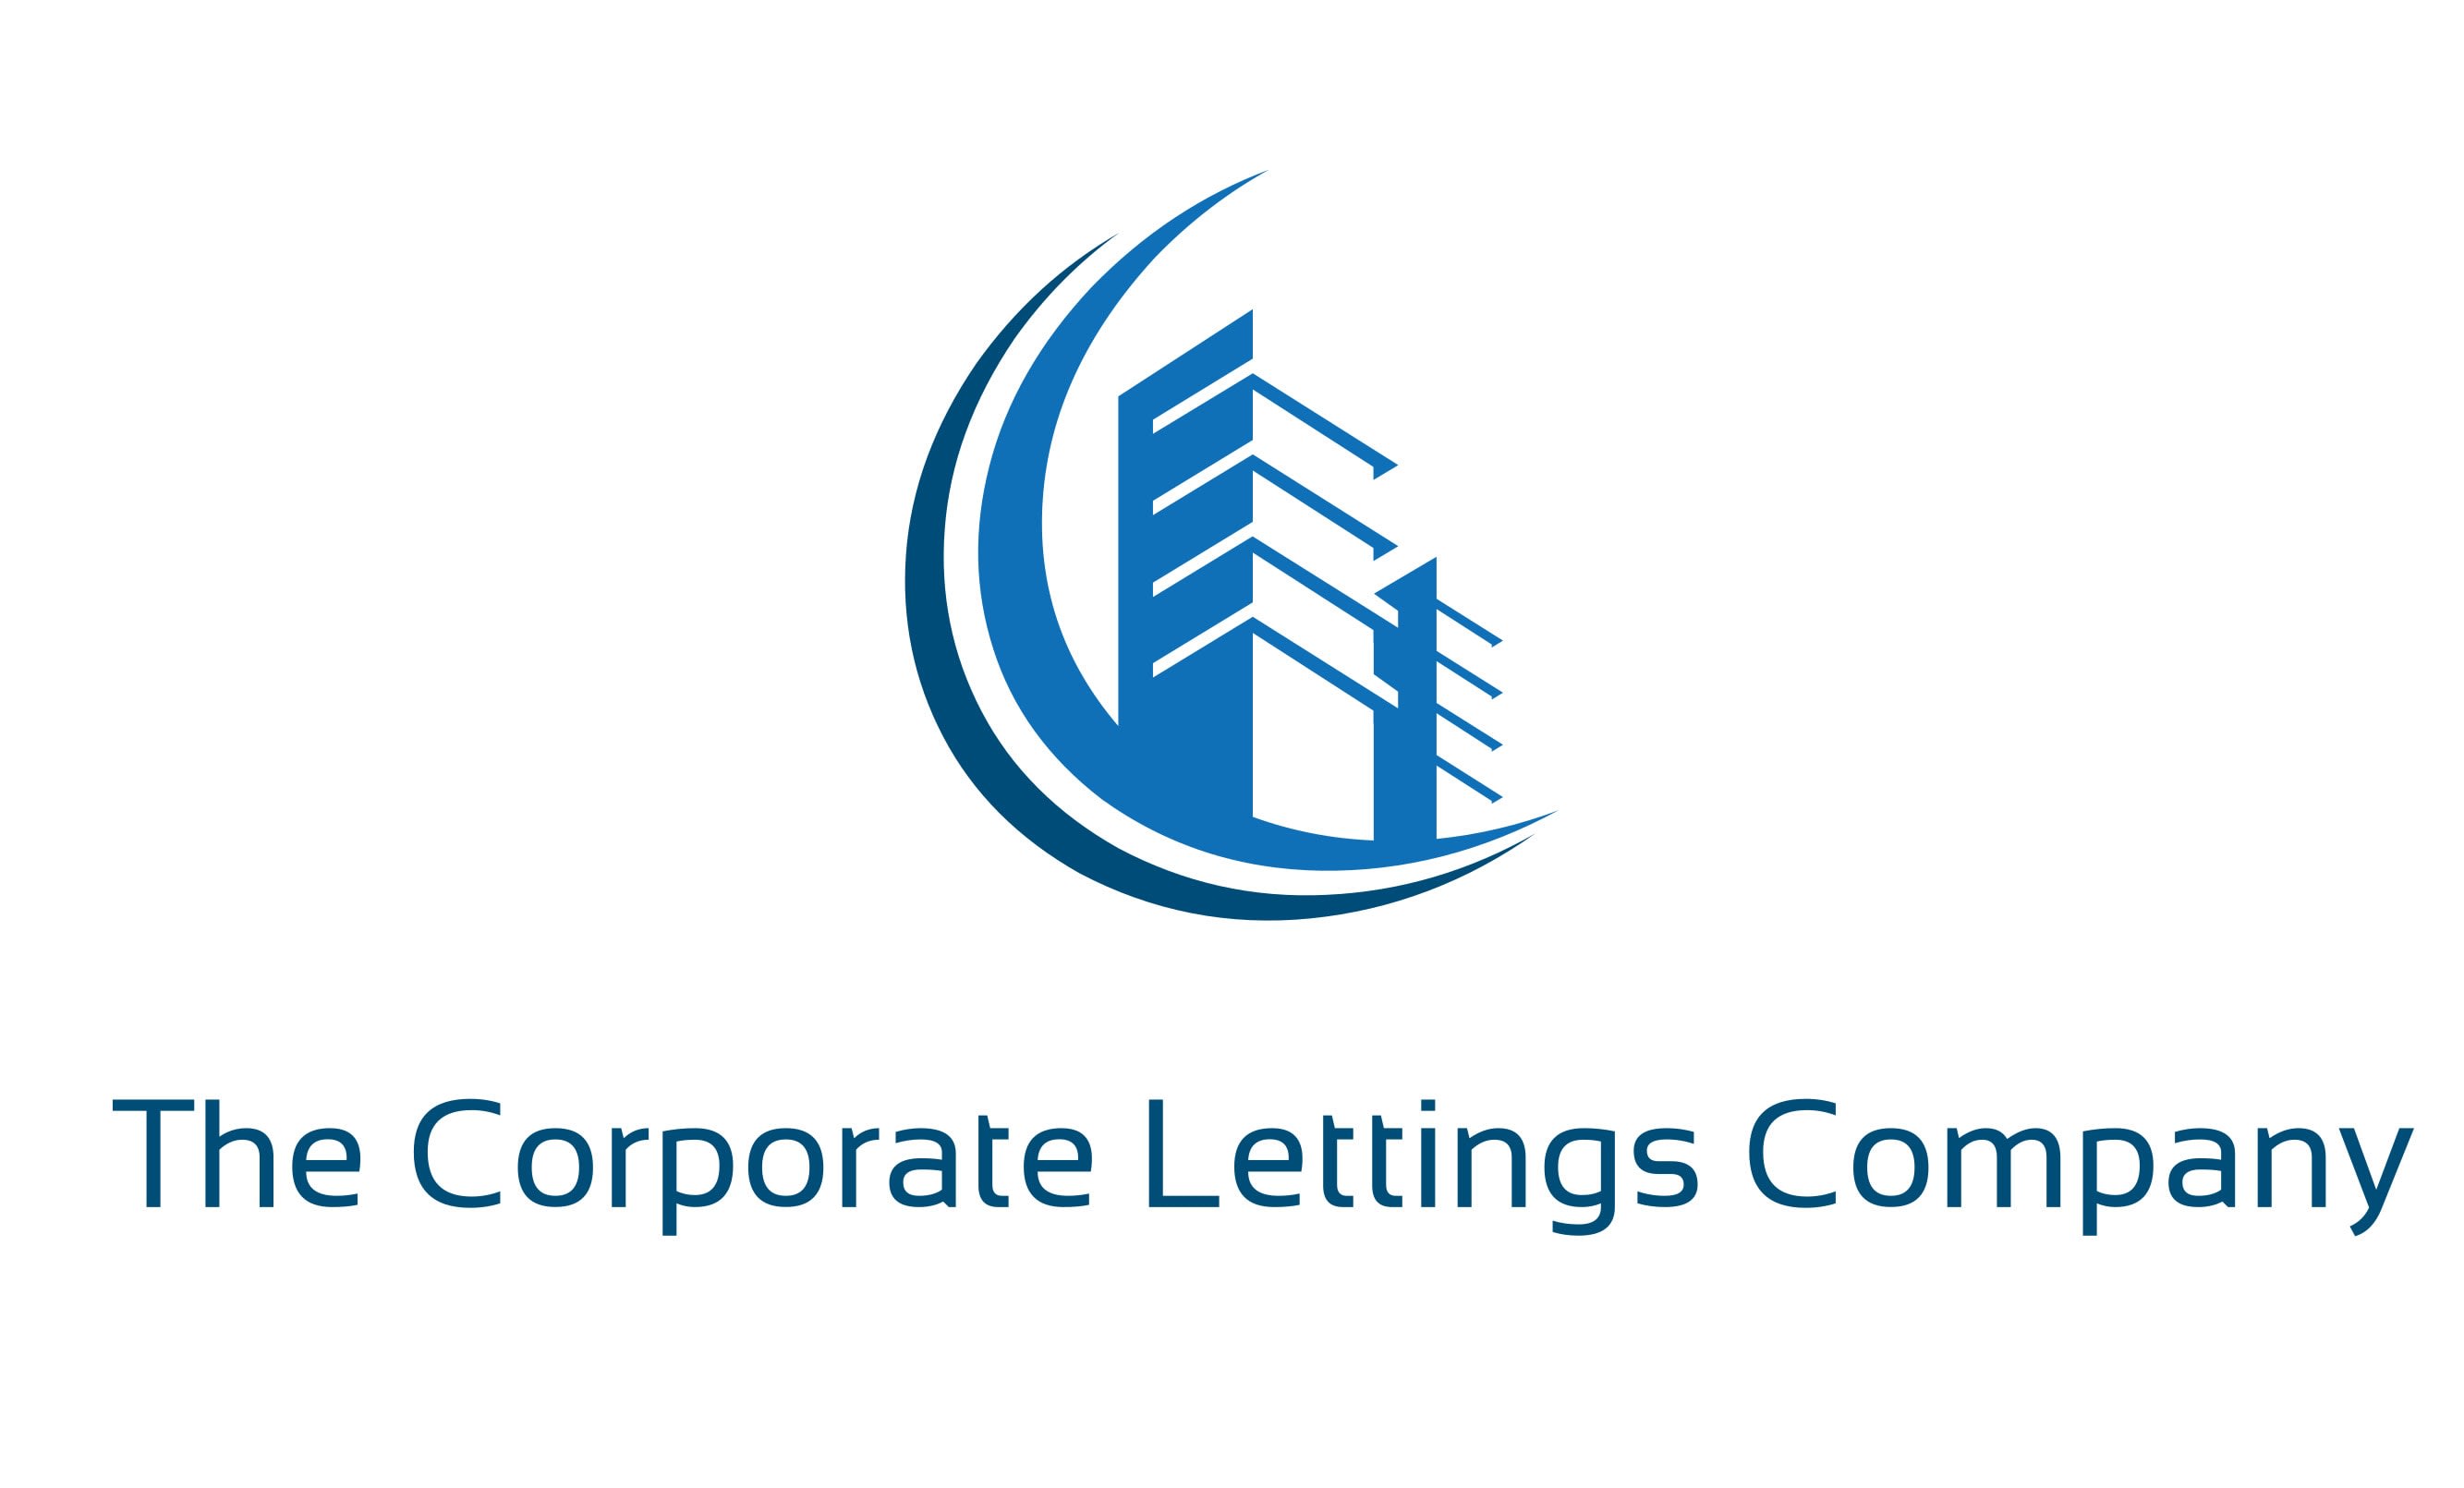 The Corporate Lettings Company